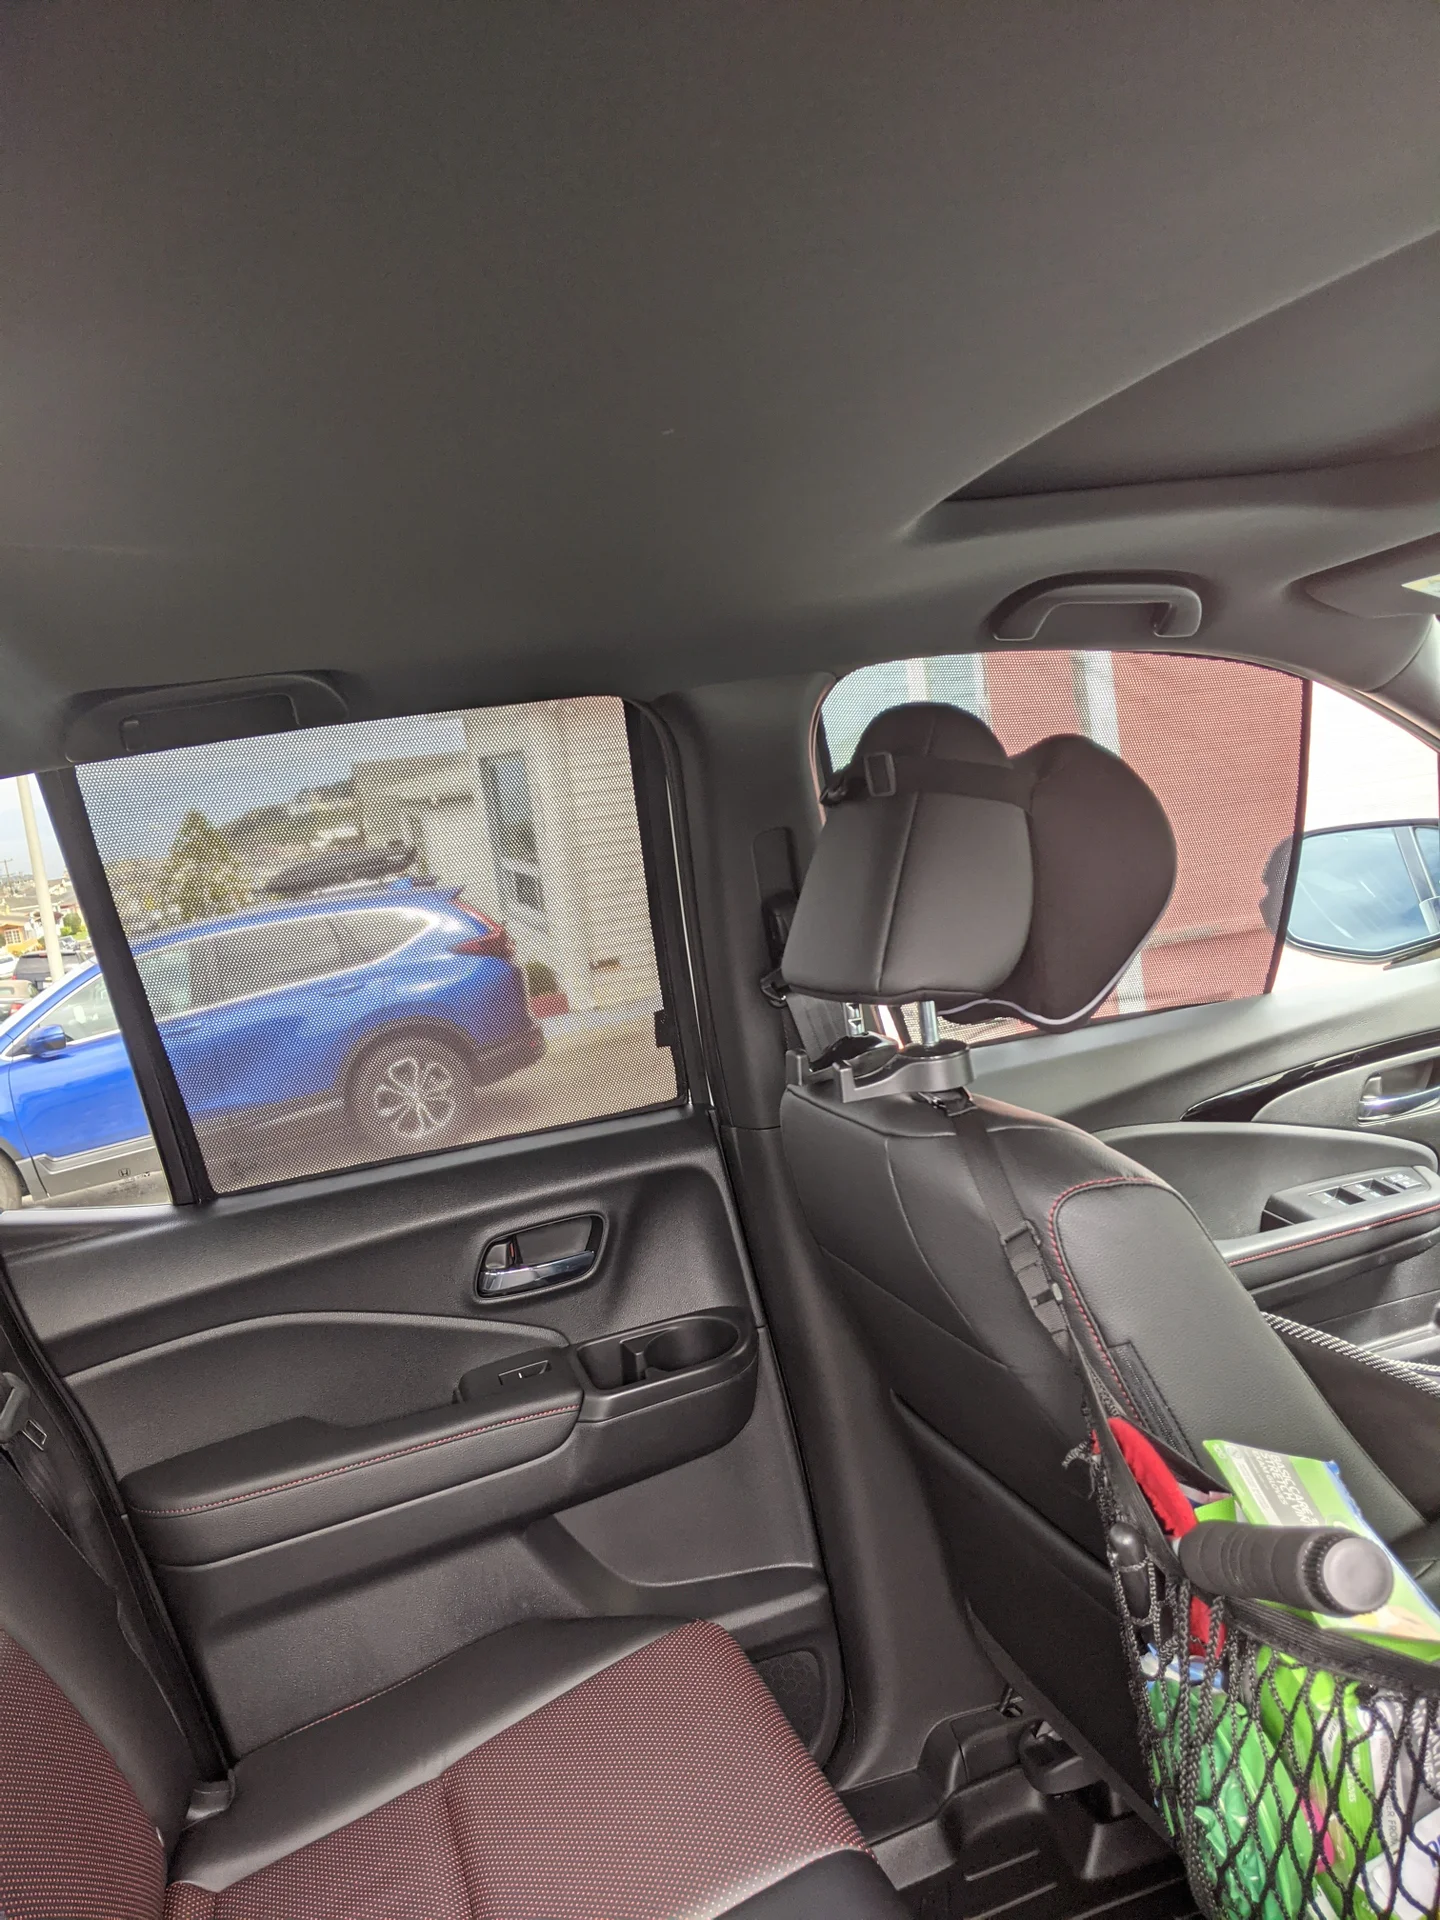 Preserving Your Ride: Understanding How Car Window Covers Interior from UV Damage